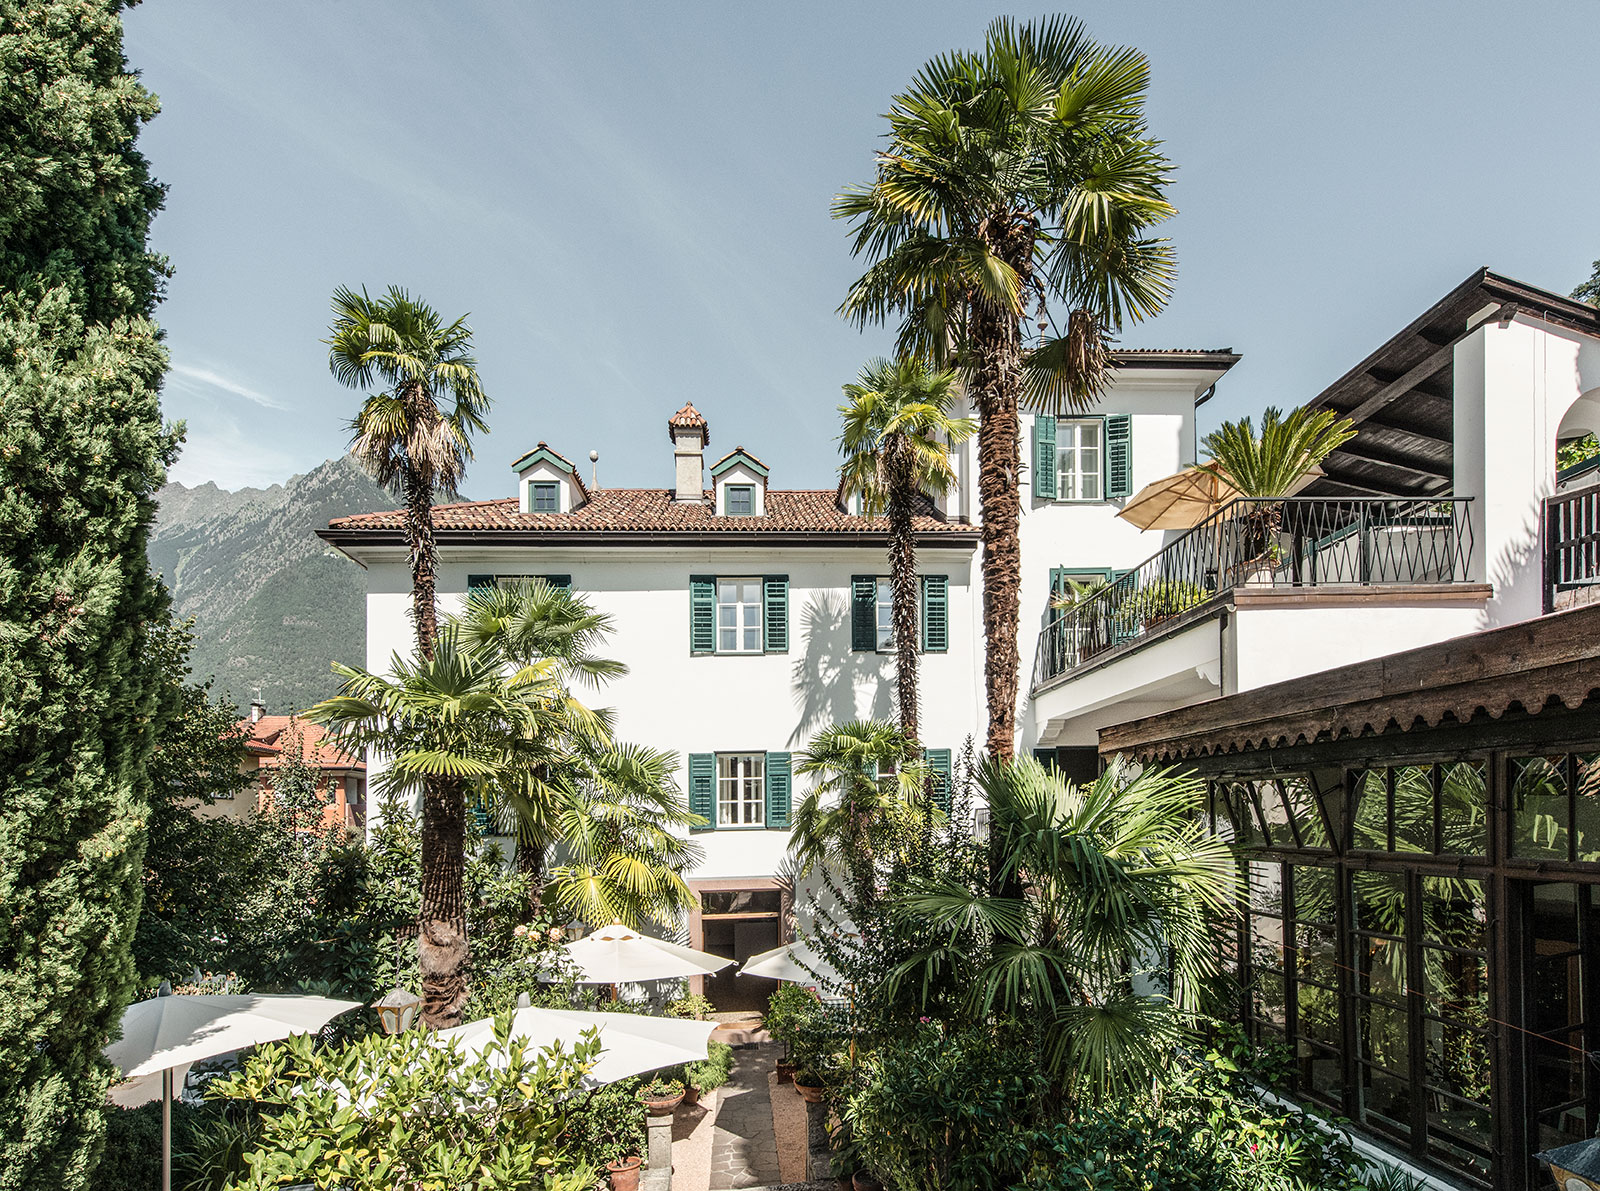 Pretty Hotels: The most beautiful hotels in South Tyrol (Image 7)